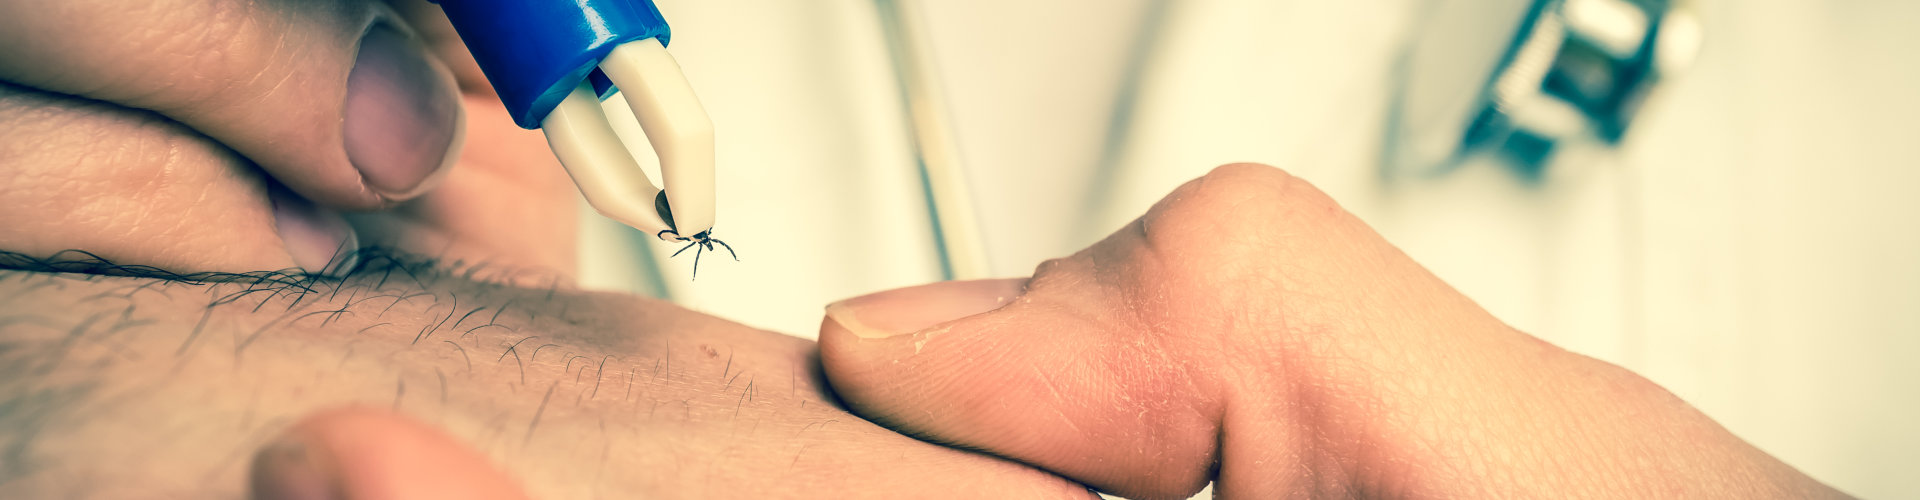 doctor removing a tick with tweezers from hand of patient